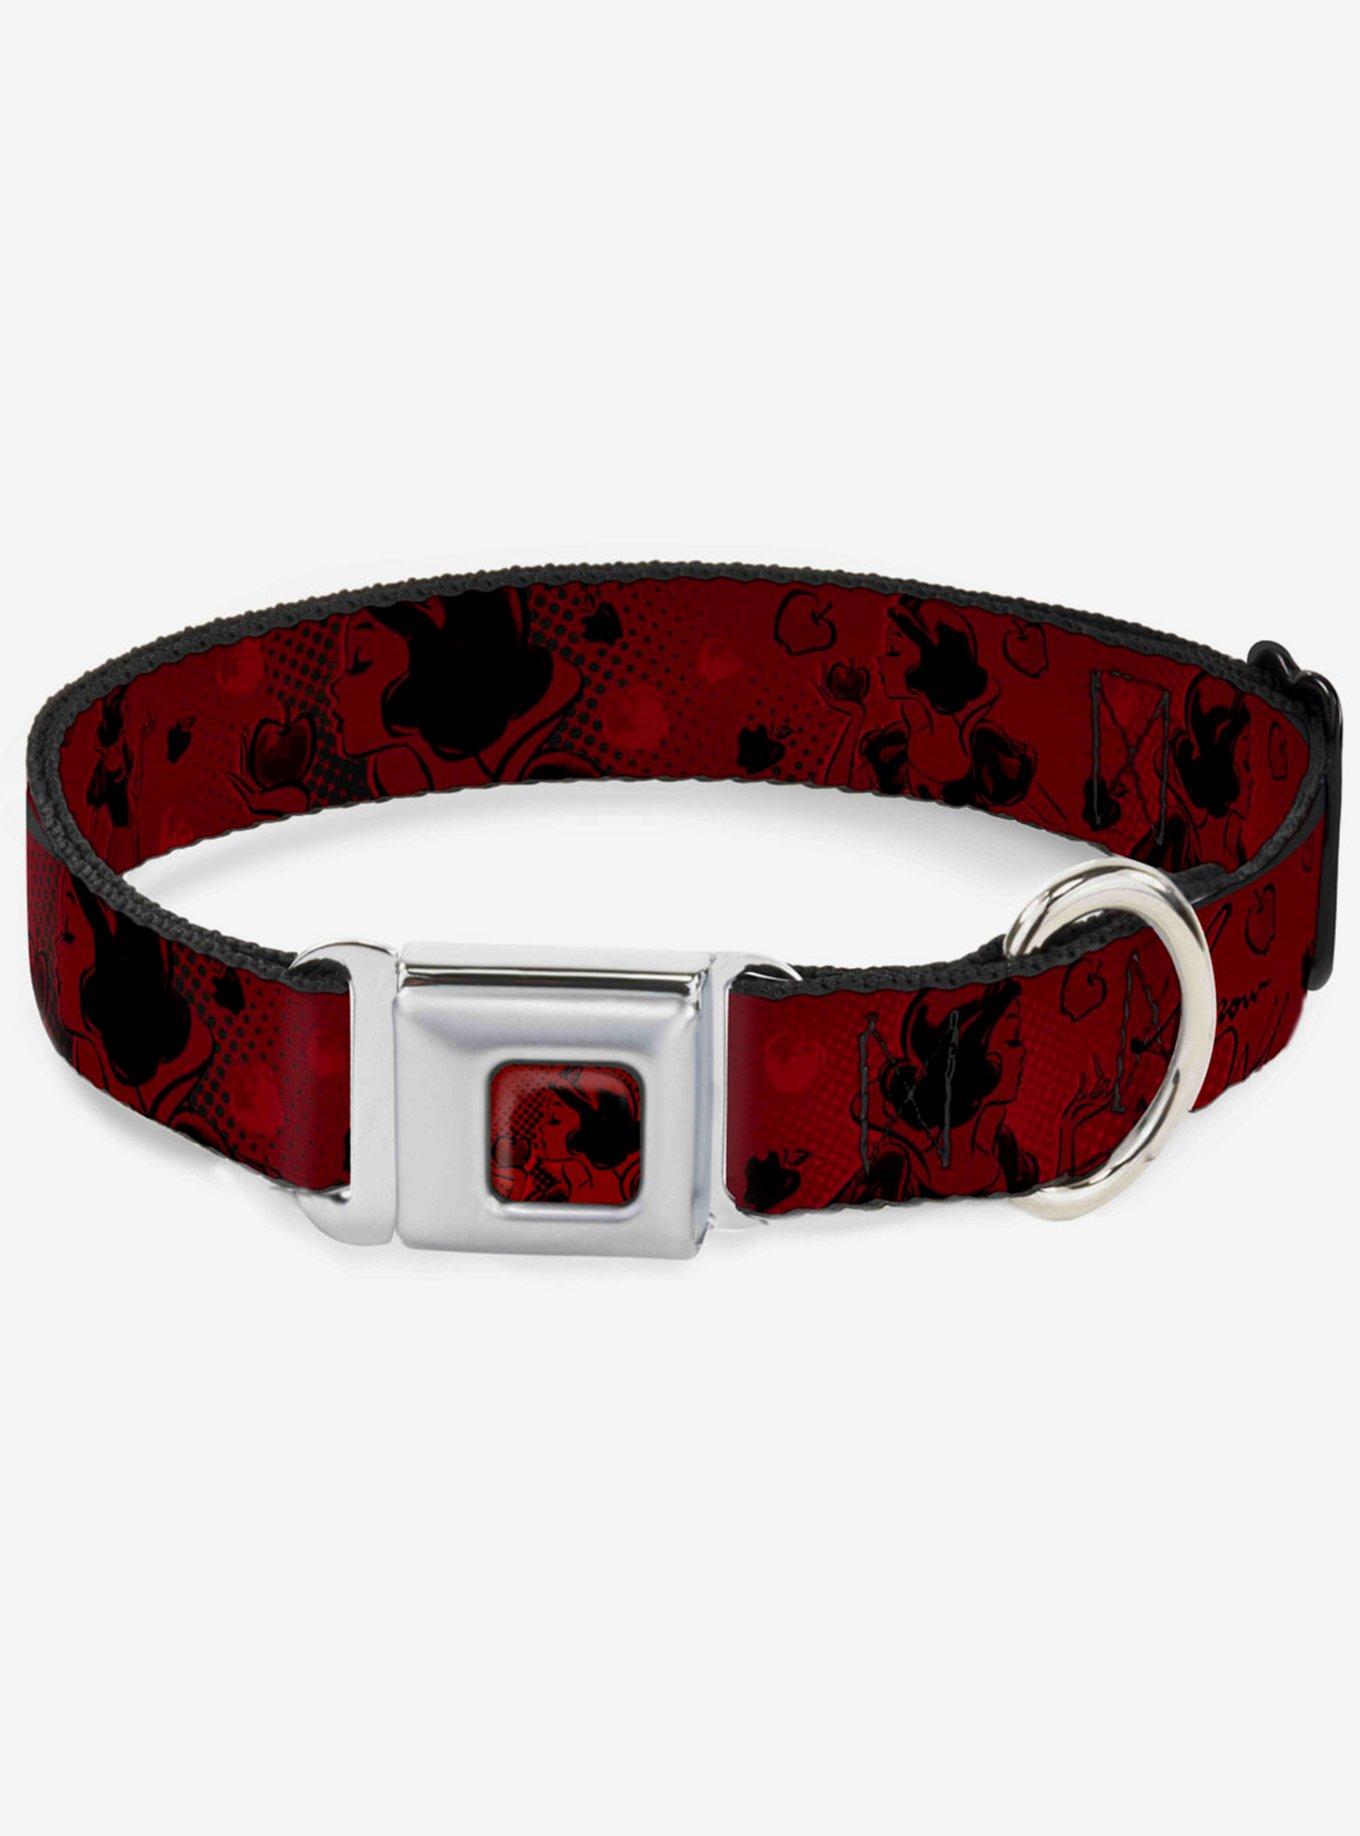 Disney Snow White And The Seven Dwarfs Poses Apple Halftone Seatbelt Buckle Dog Collar, RED, hi-res